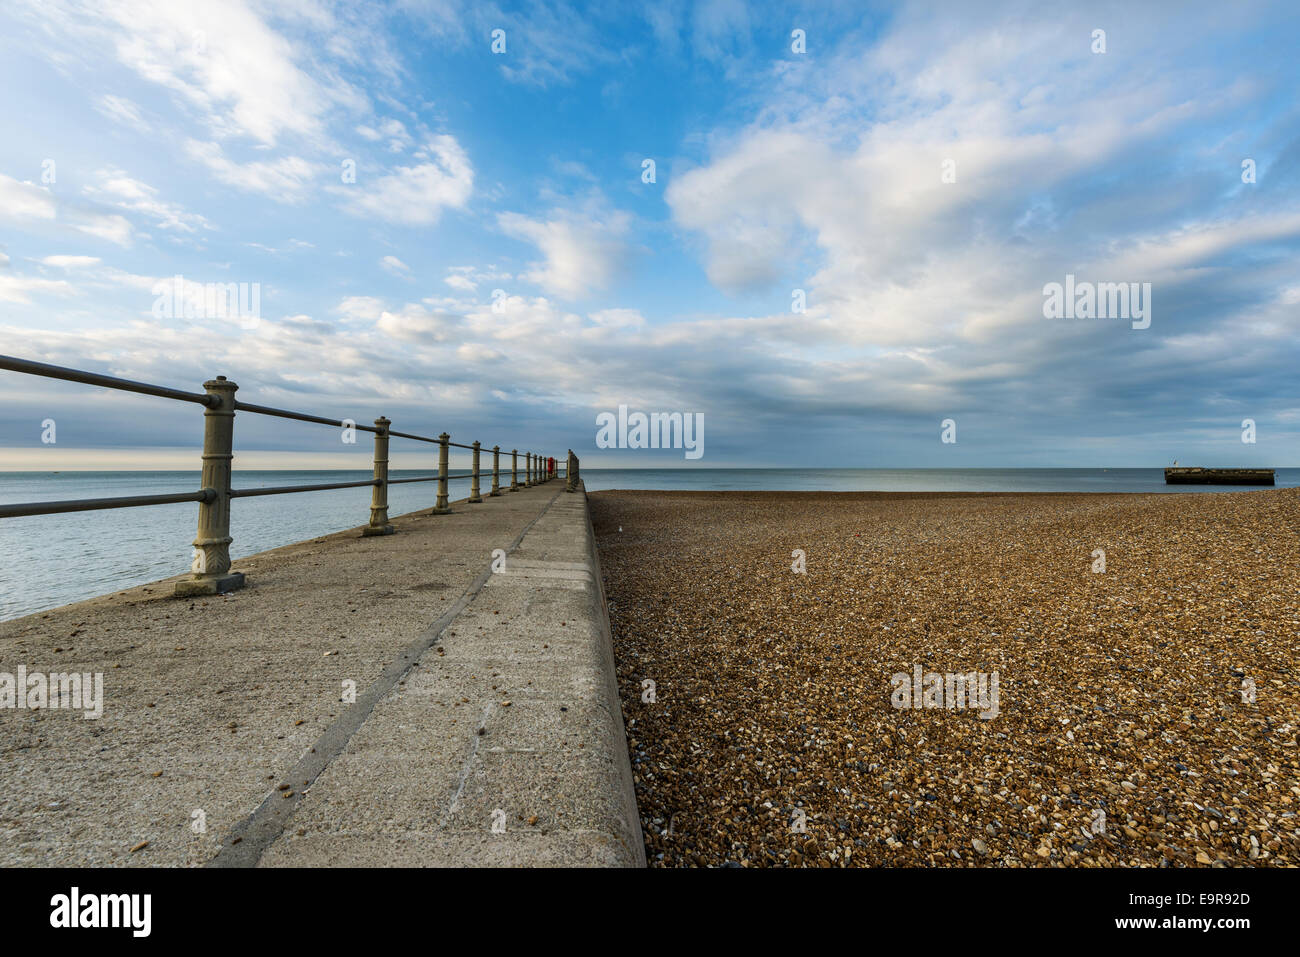 Looking out to sea down the length of a break water to blue skies on Stade beach Hastings, East Sussex Stock Photo